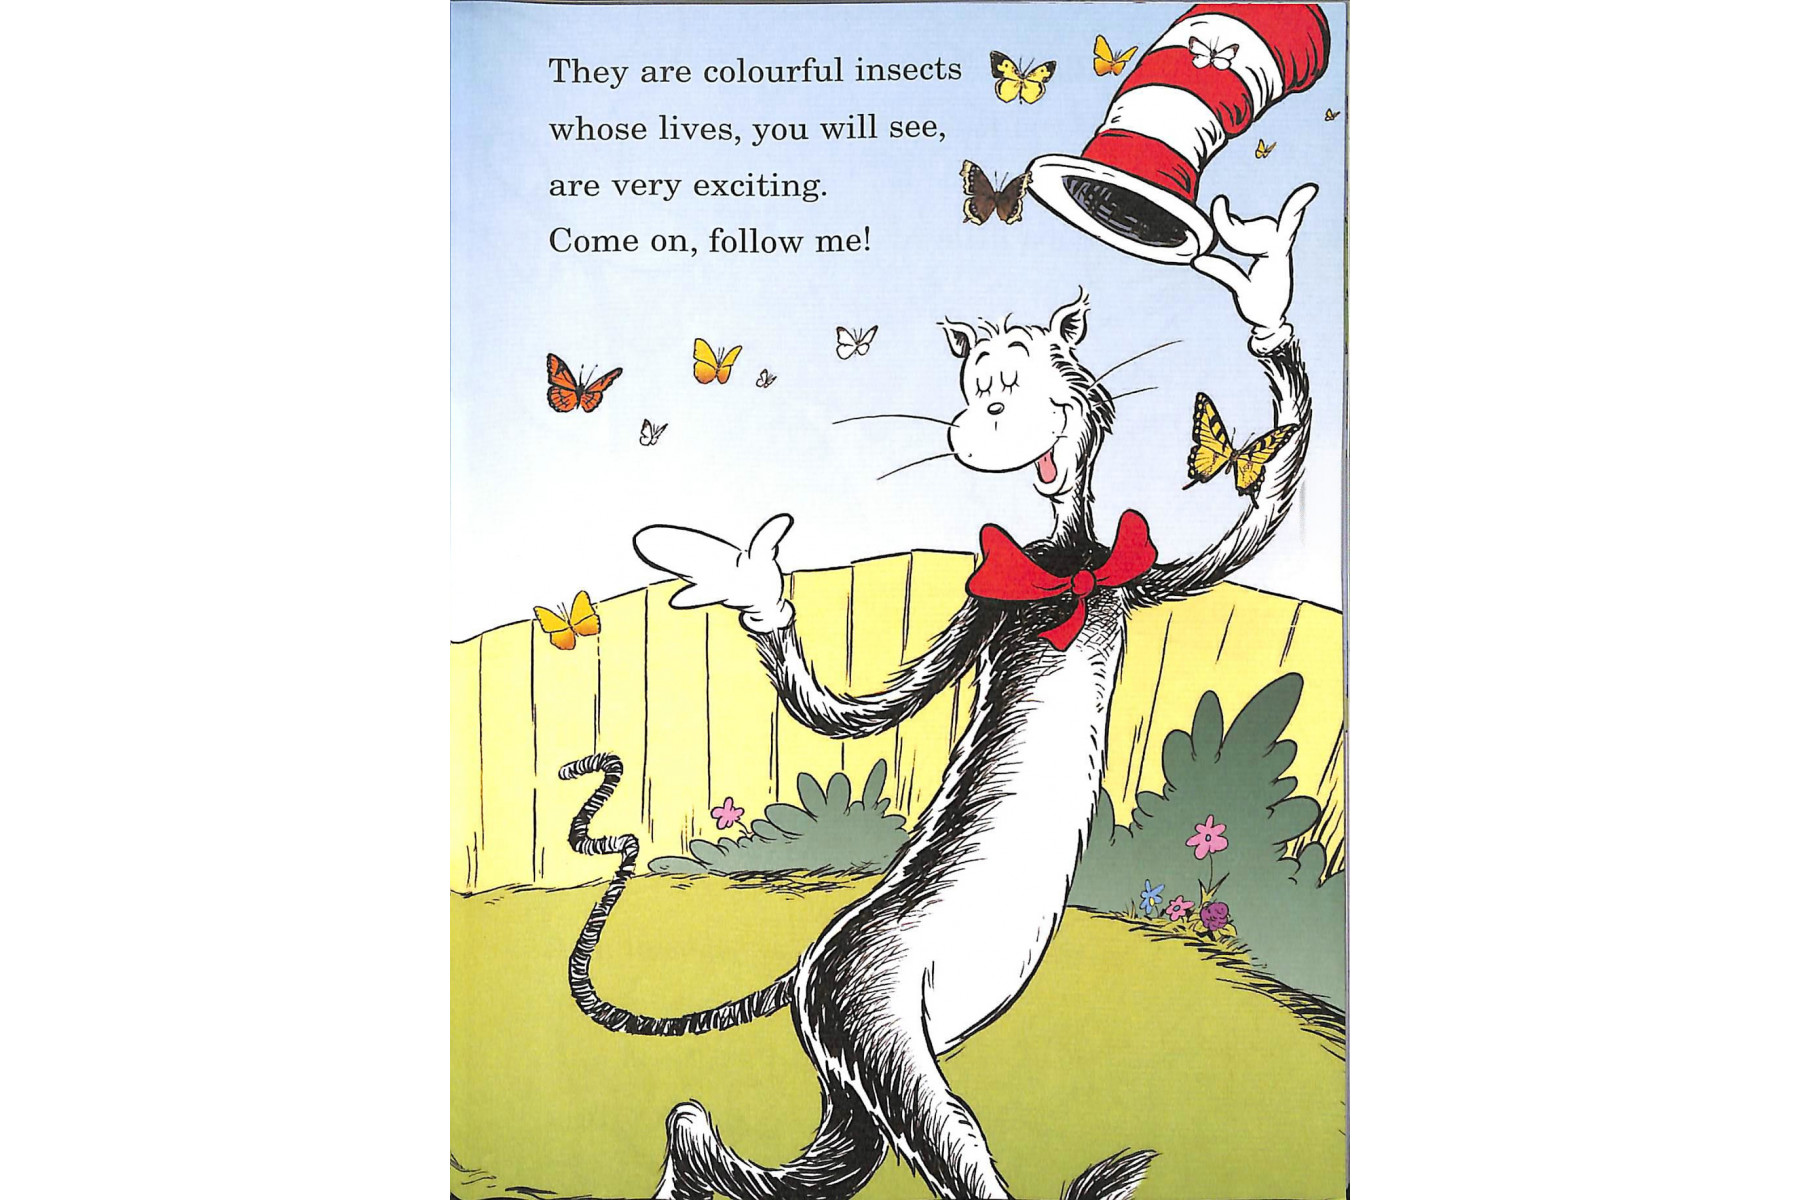 My Oh My A Butterfly (The Cat in the Hat's Learning Library)